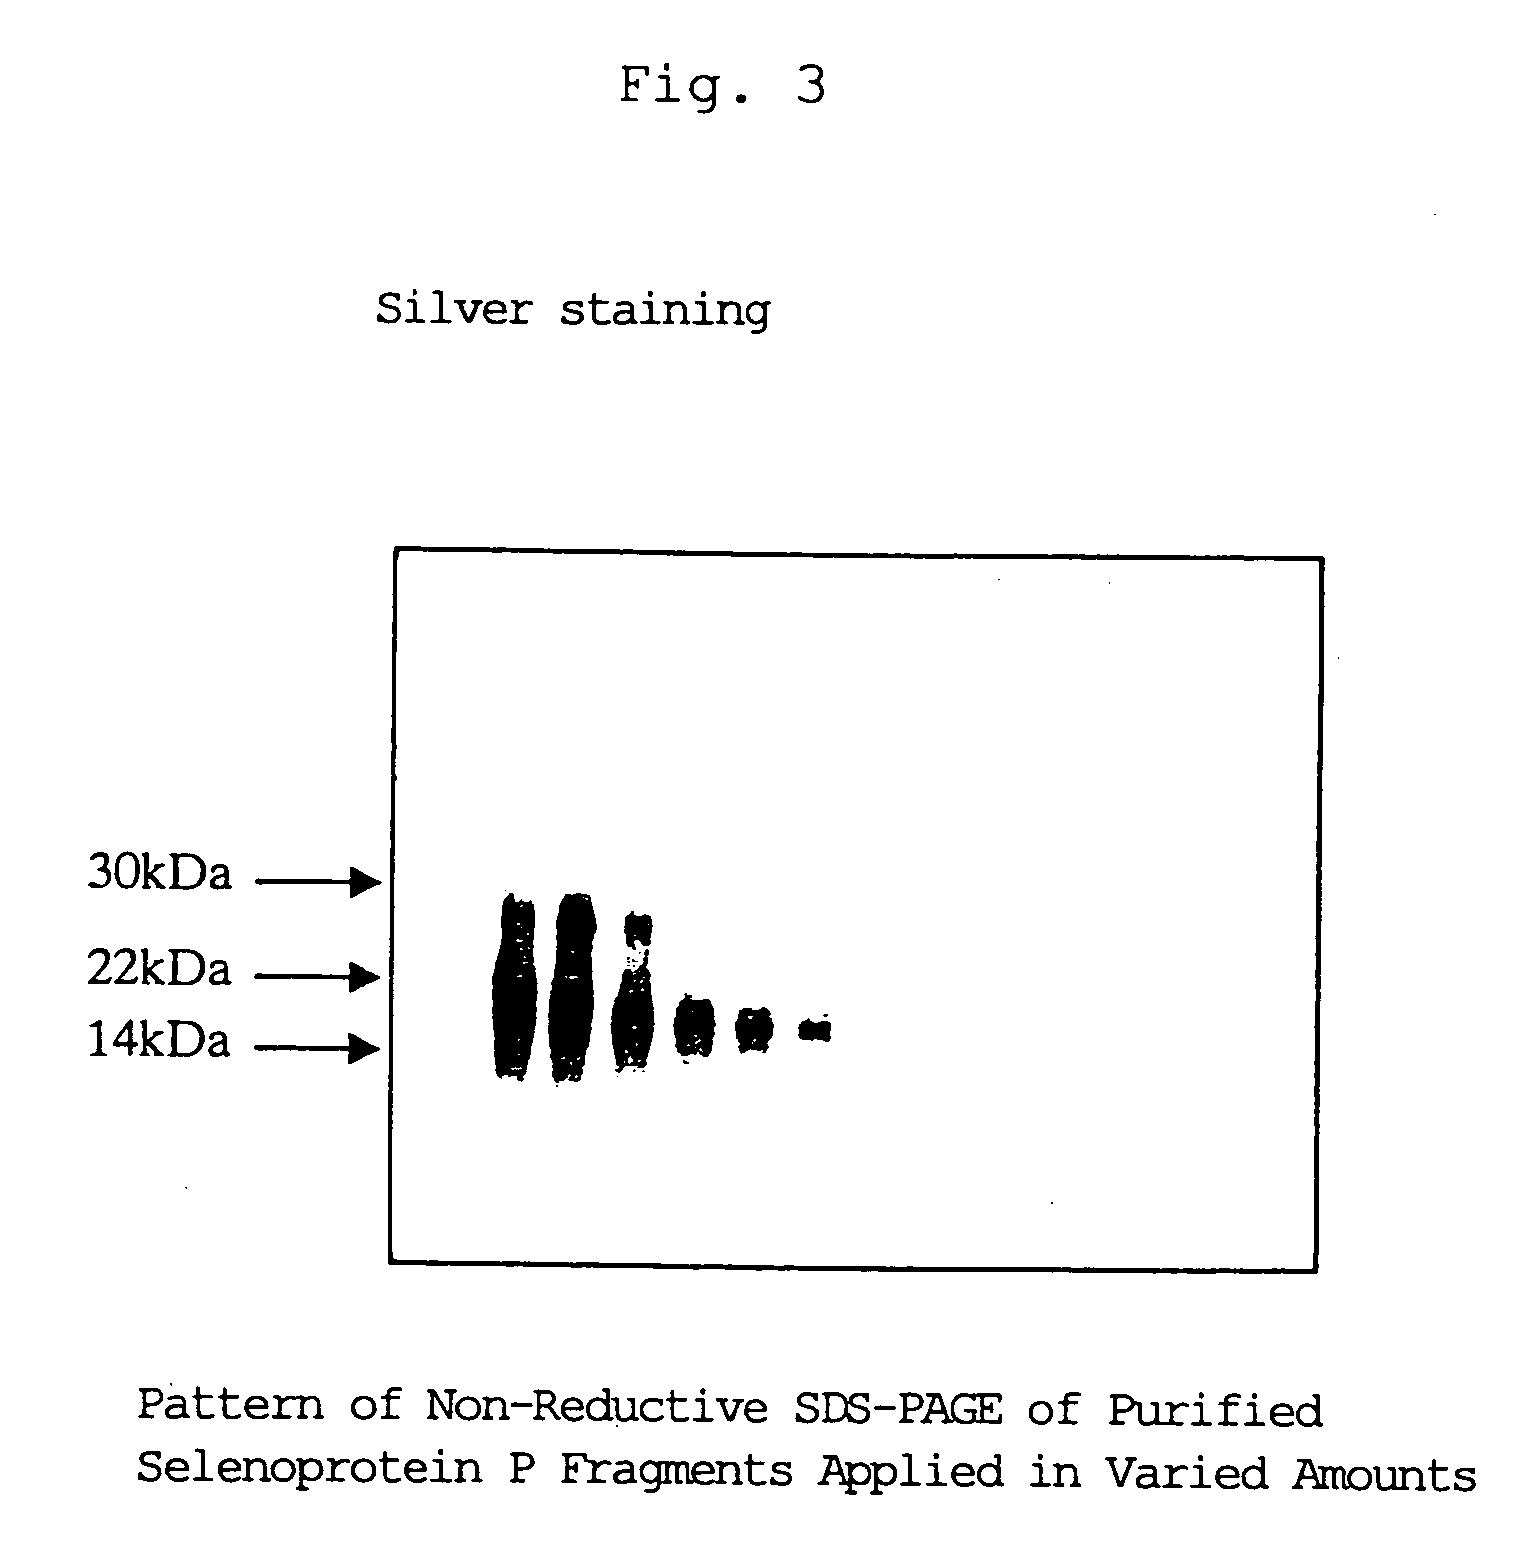 Peptide fragments having cell death-inhibitory activity